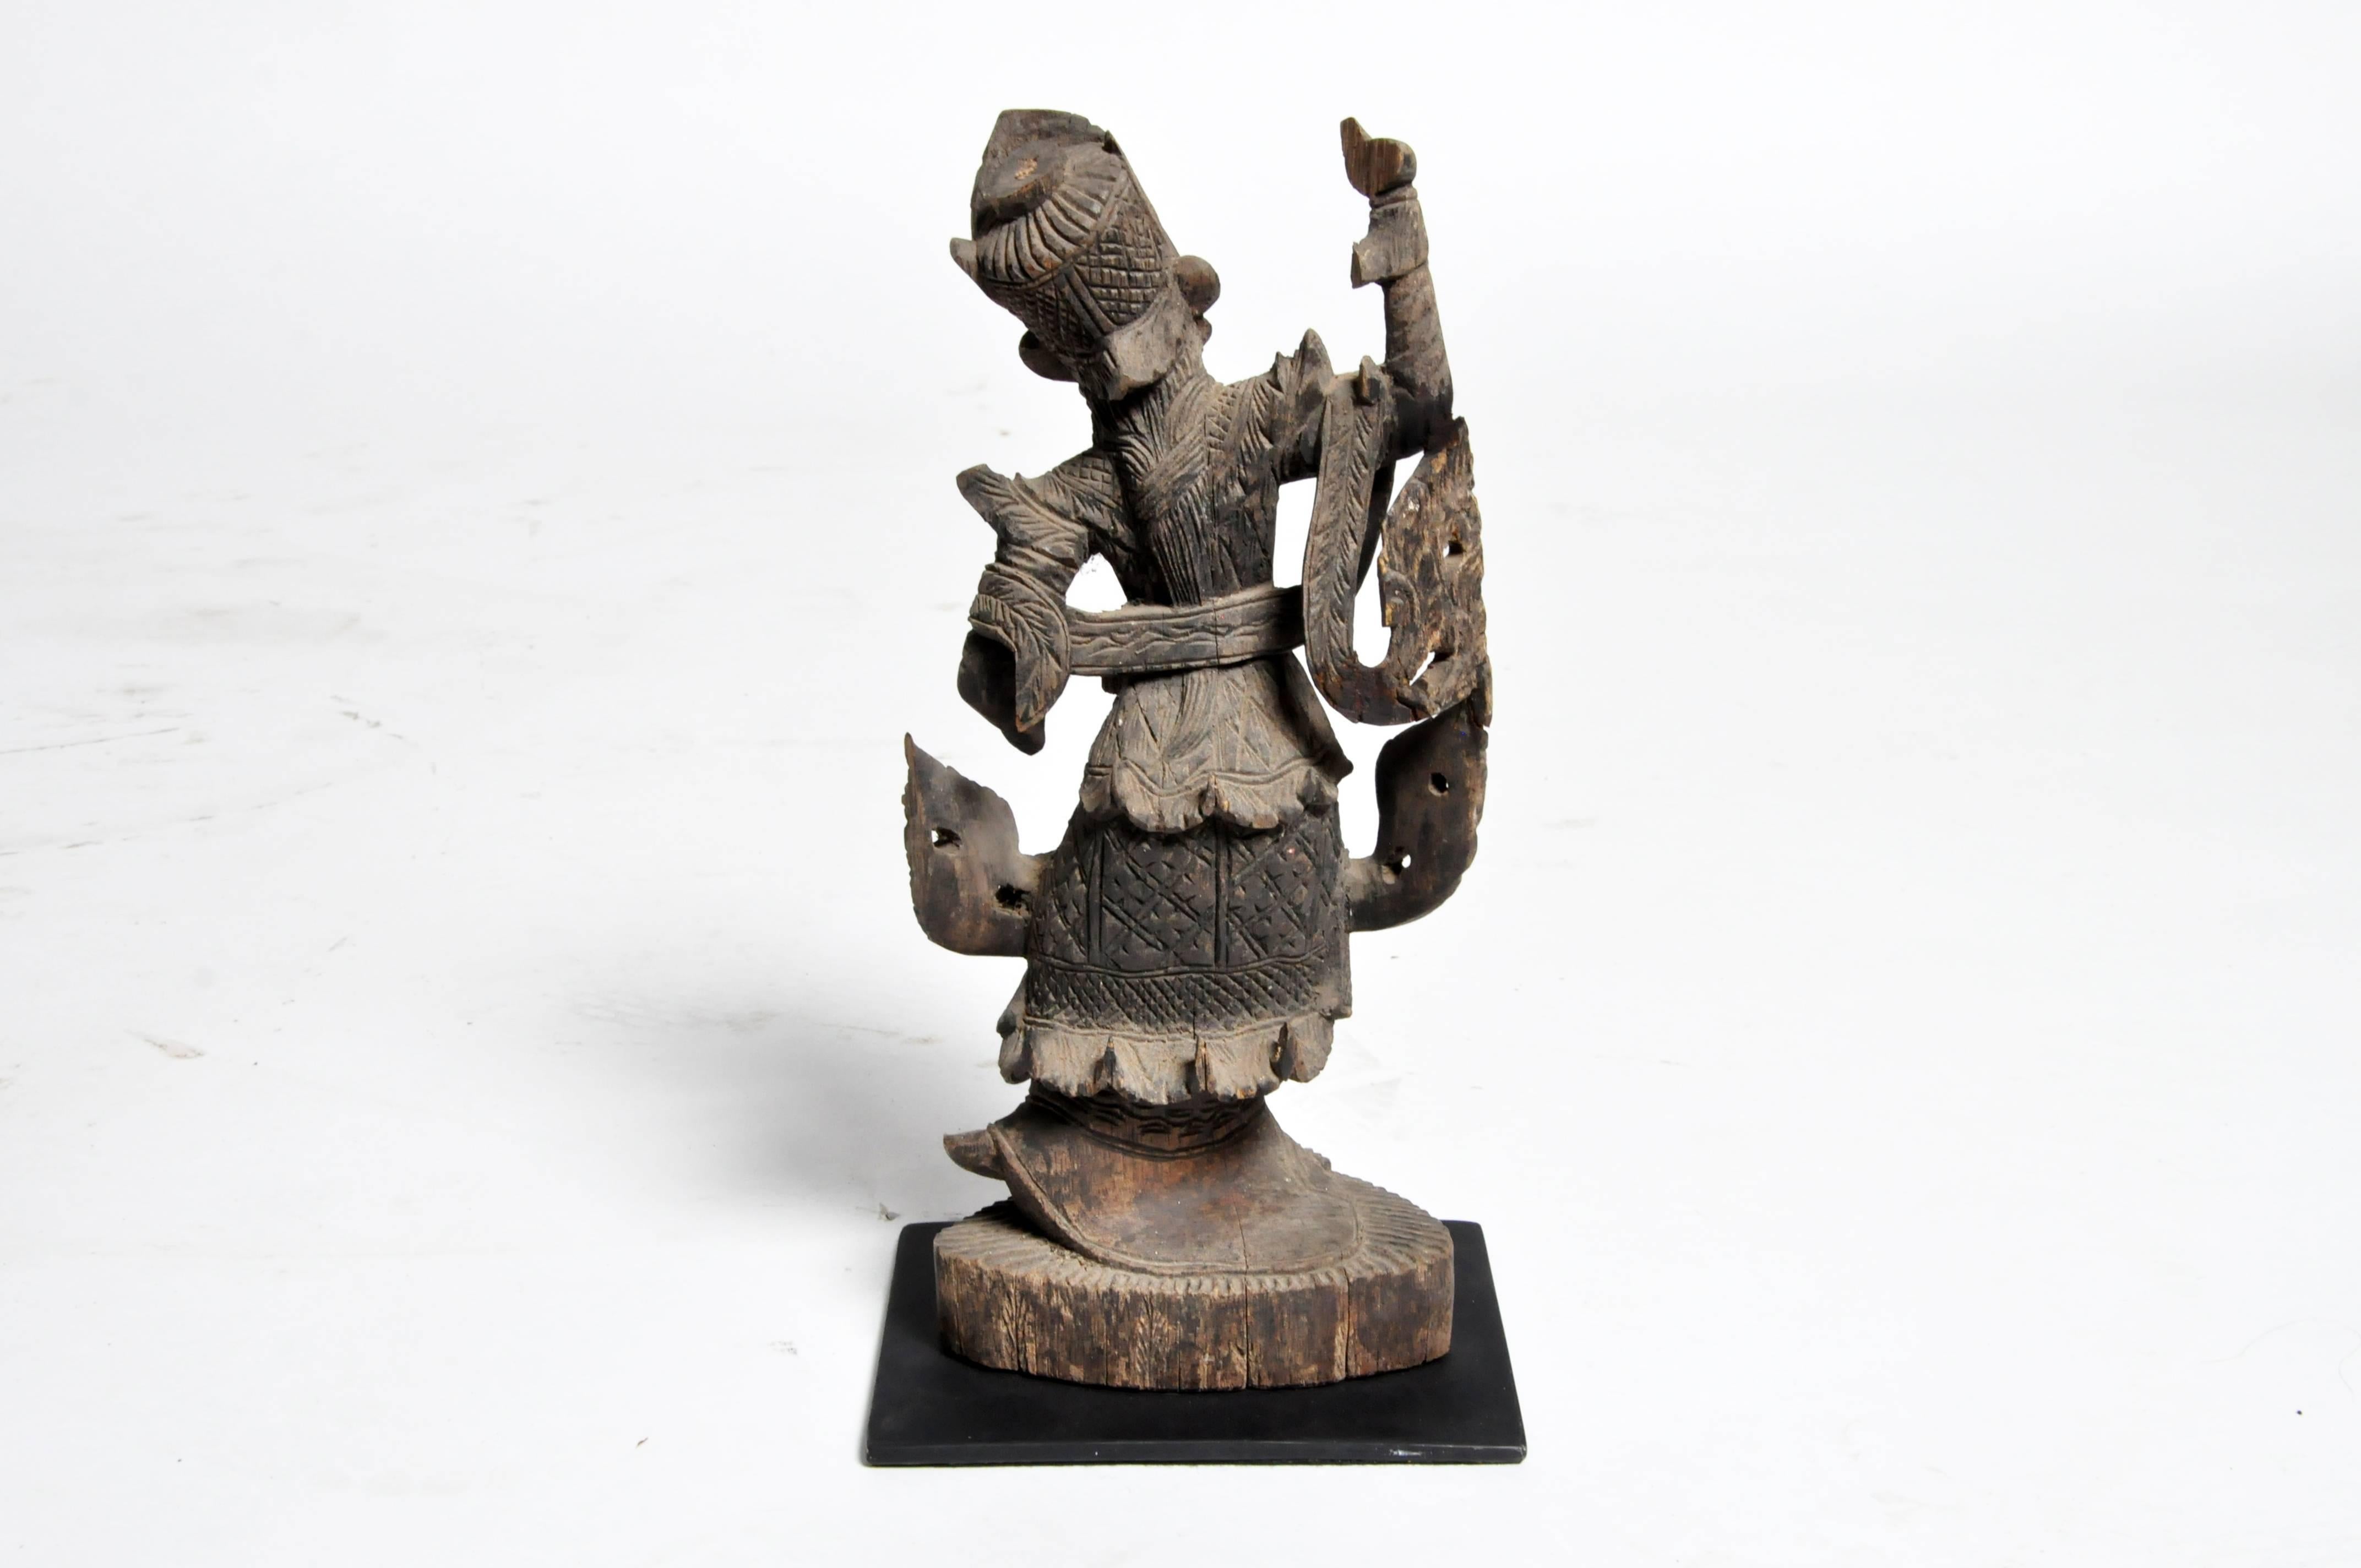 This beautifully carved Burmese dancer is from Mandalay, Burma and was made from teak wood, circa 1950.